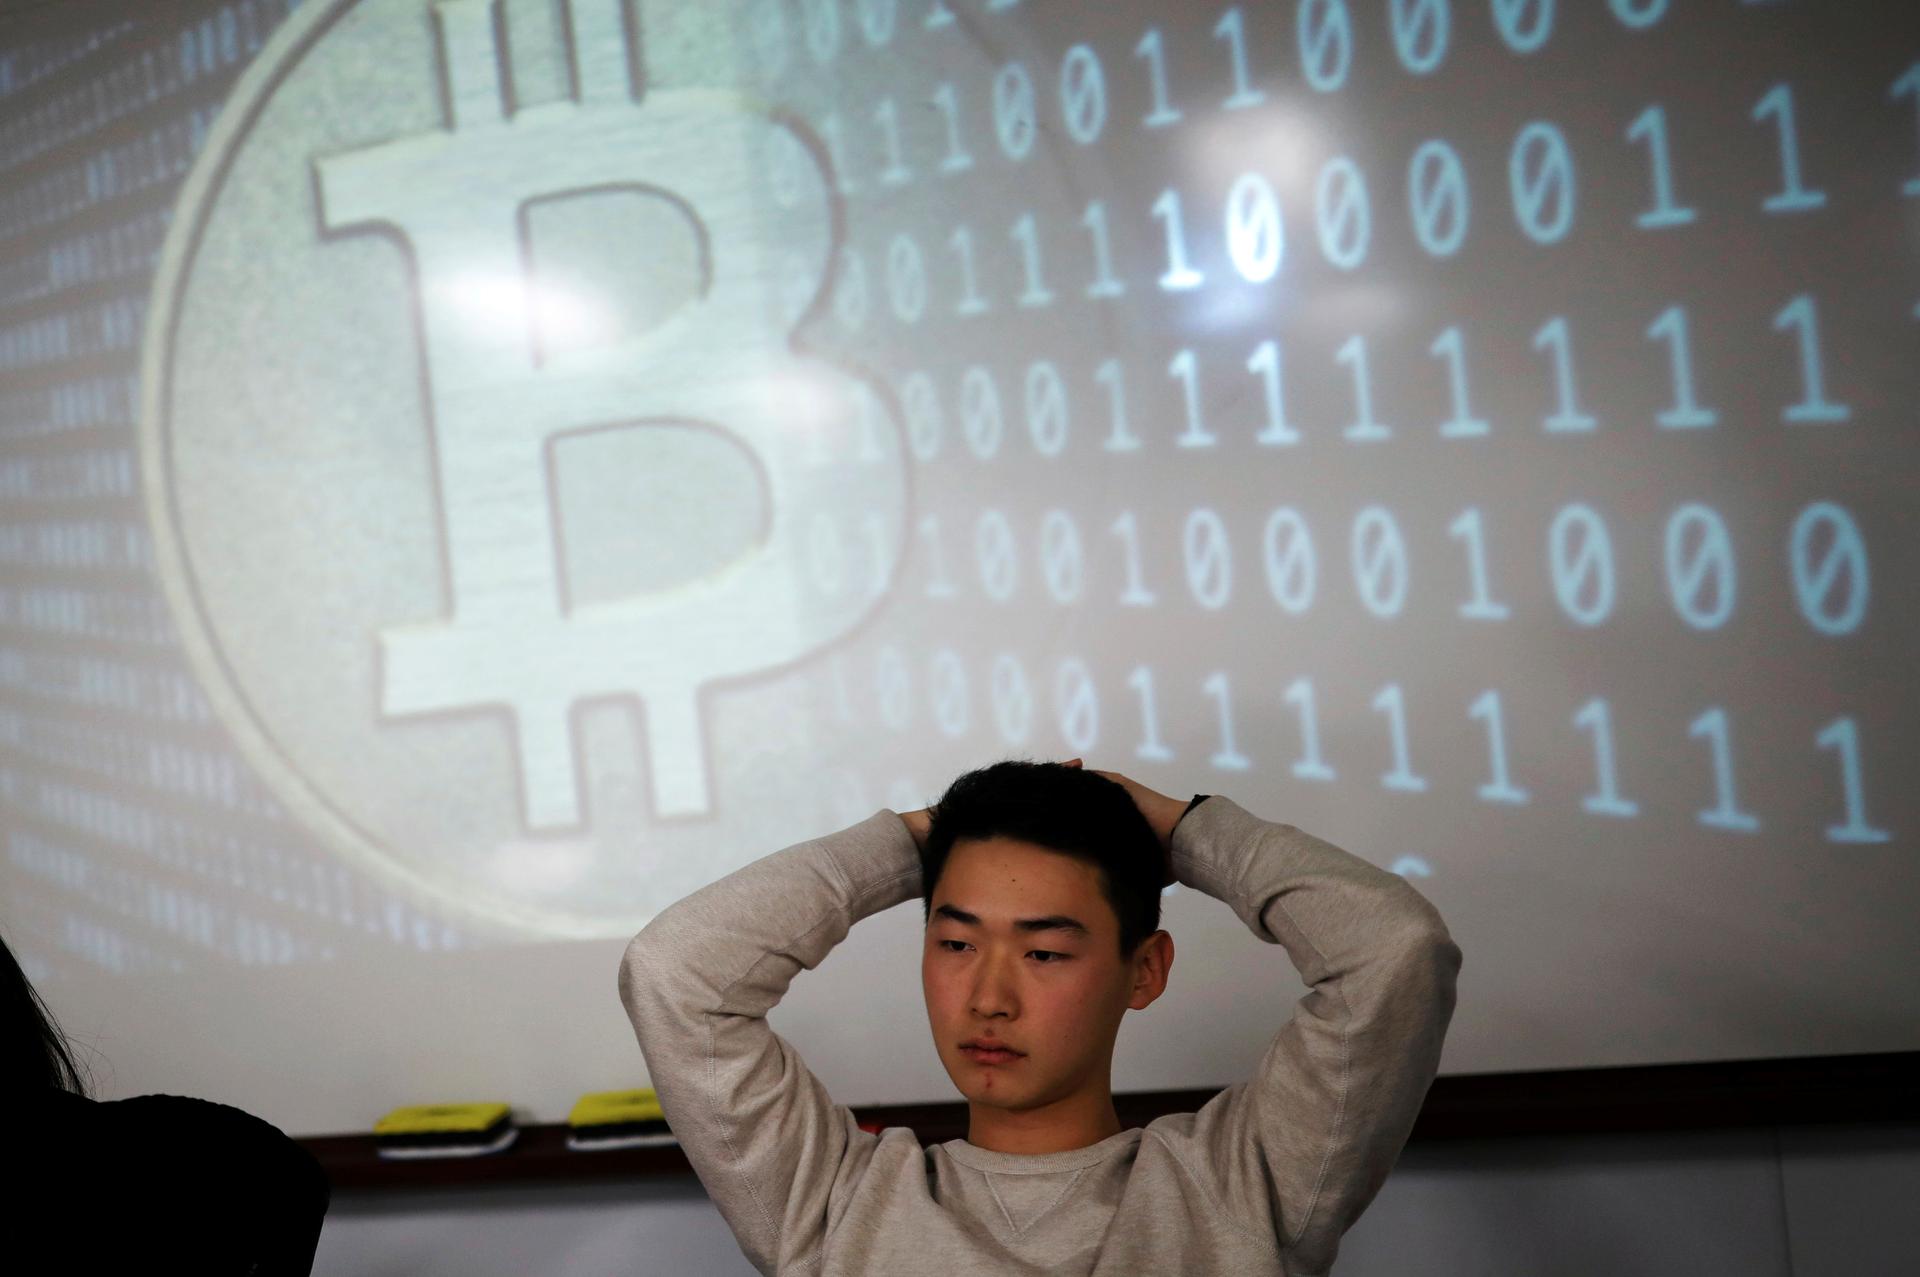 A university student, a member of a club studying cryptocurrencies, attends a meeting at a university in Seoul, South Korea, December 20, 2017.